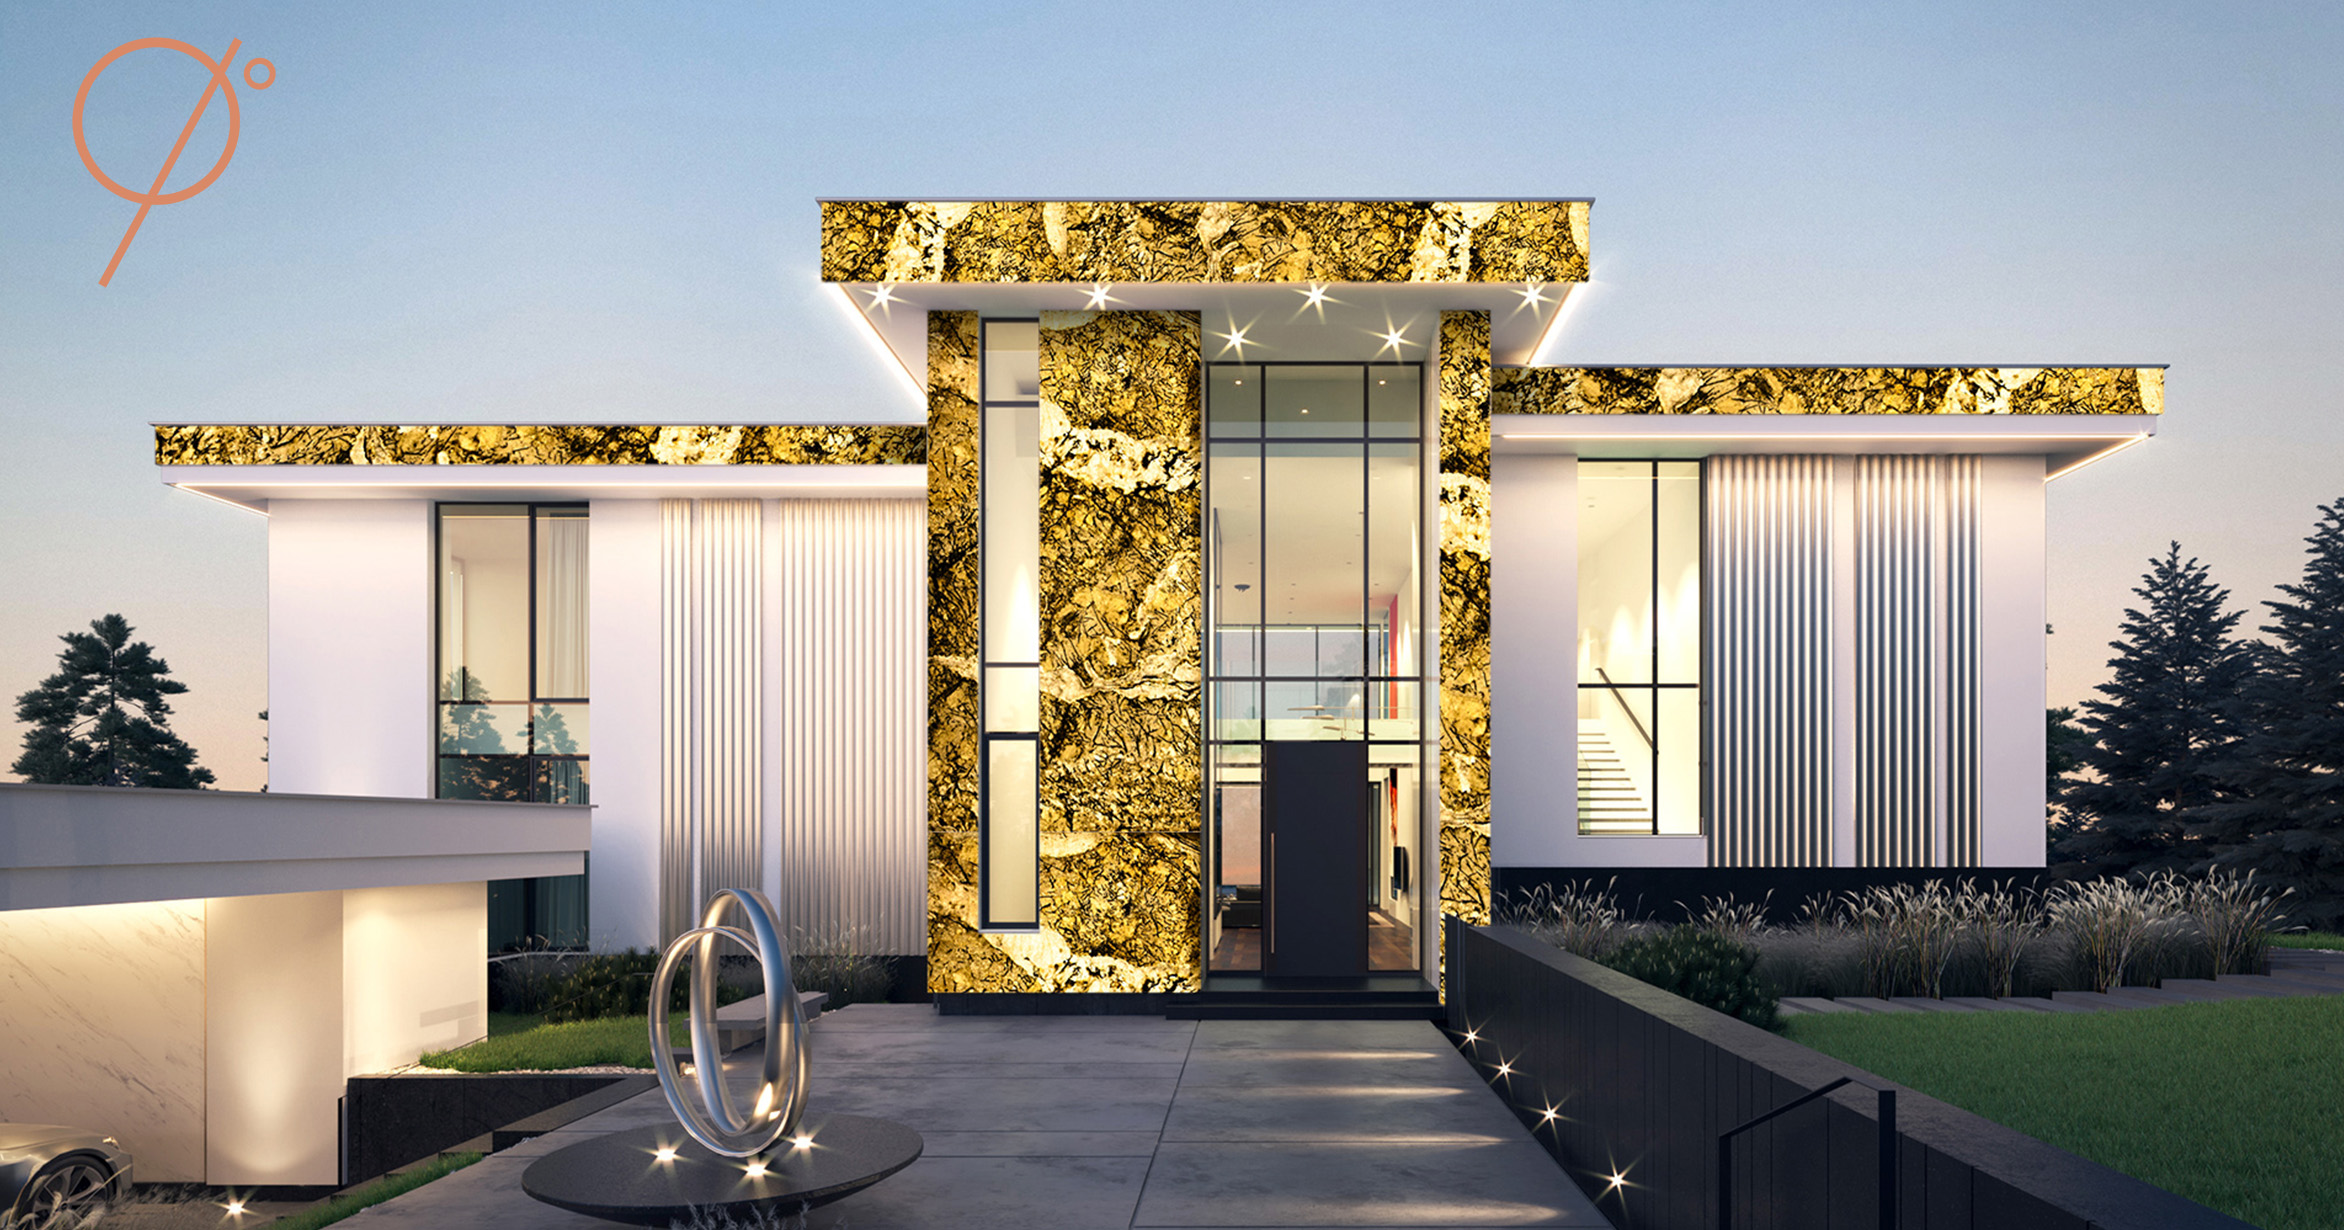 A luxurious villa adorned with backlit quartzite exterior facade. The stone lends a warm golden touch to the home while elevating the lavishness. Backlit Stones in Interior Design Trends: Ninety Degree Stone